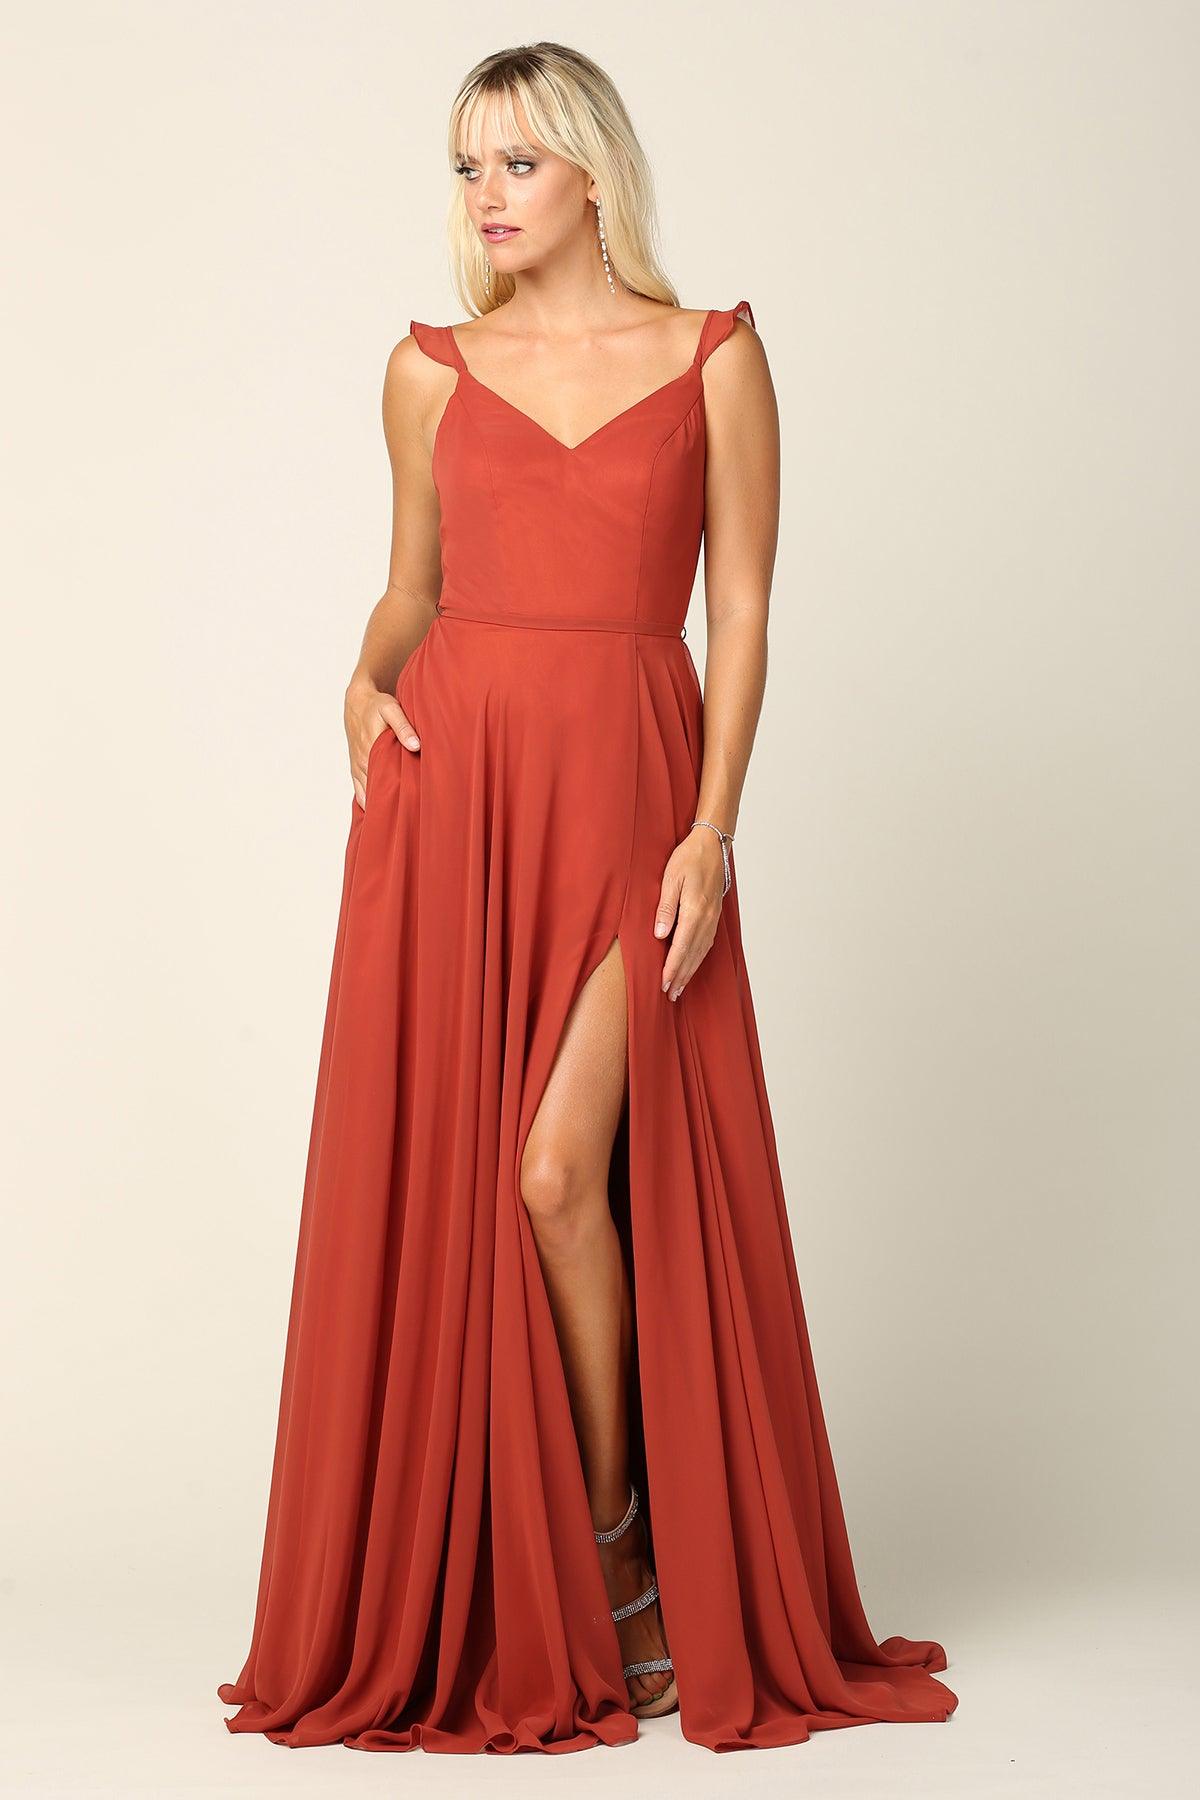 Long Bridesmaids Ruffle Sleeve Chiffon Gown - The Dress Outlet